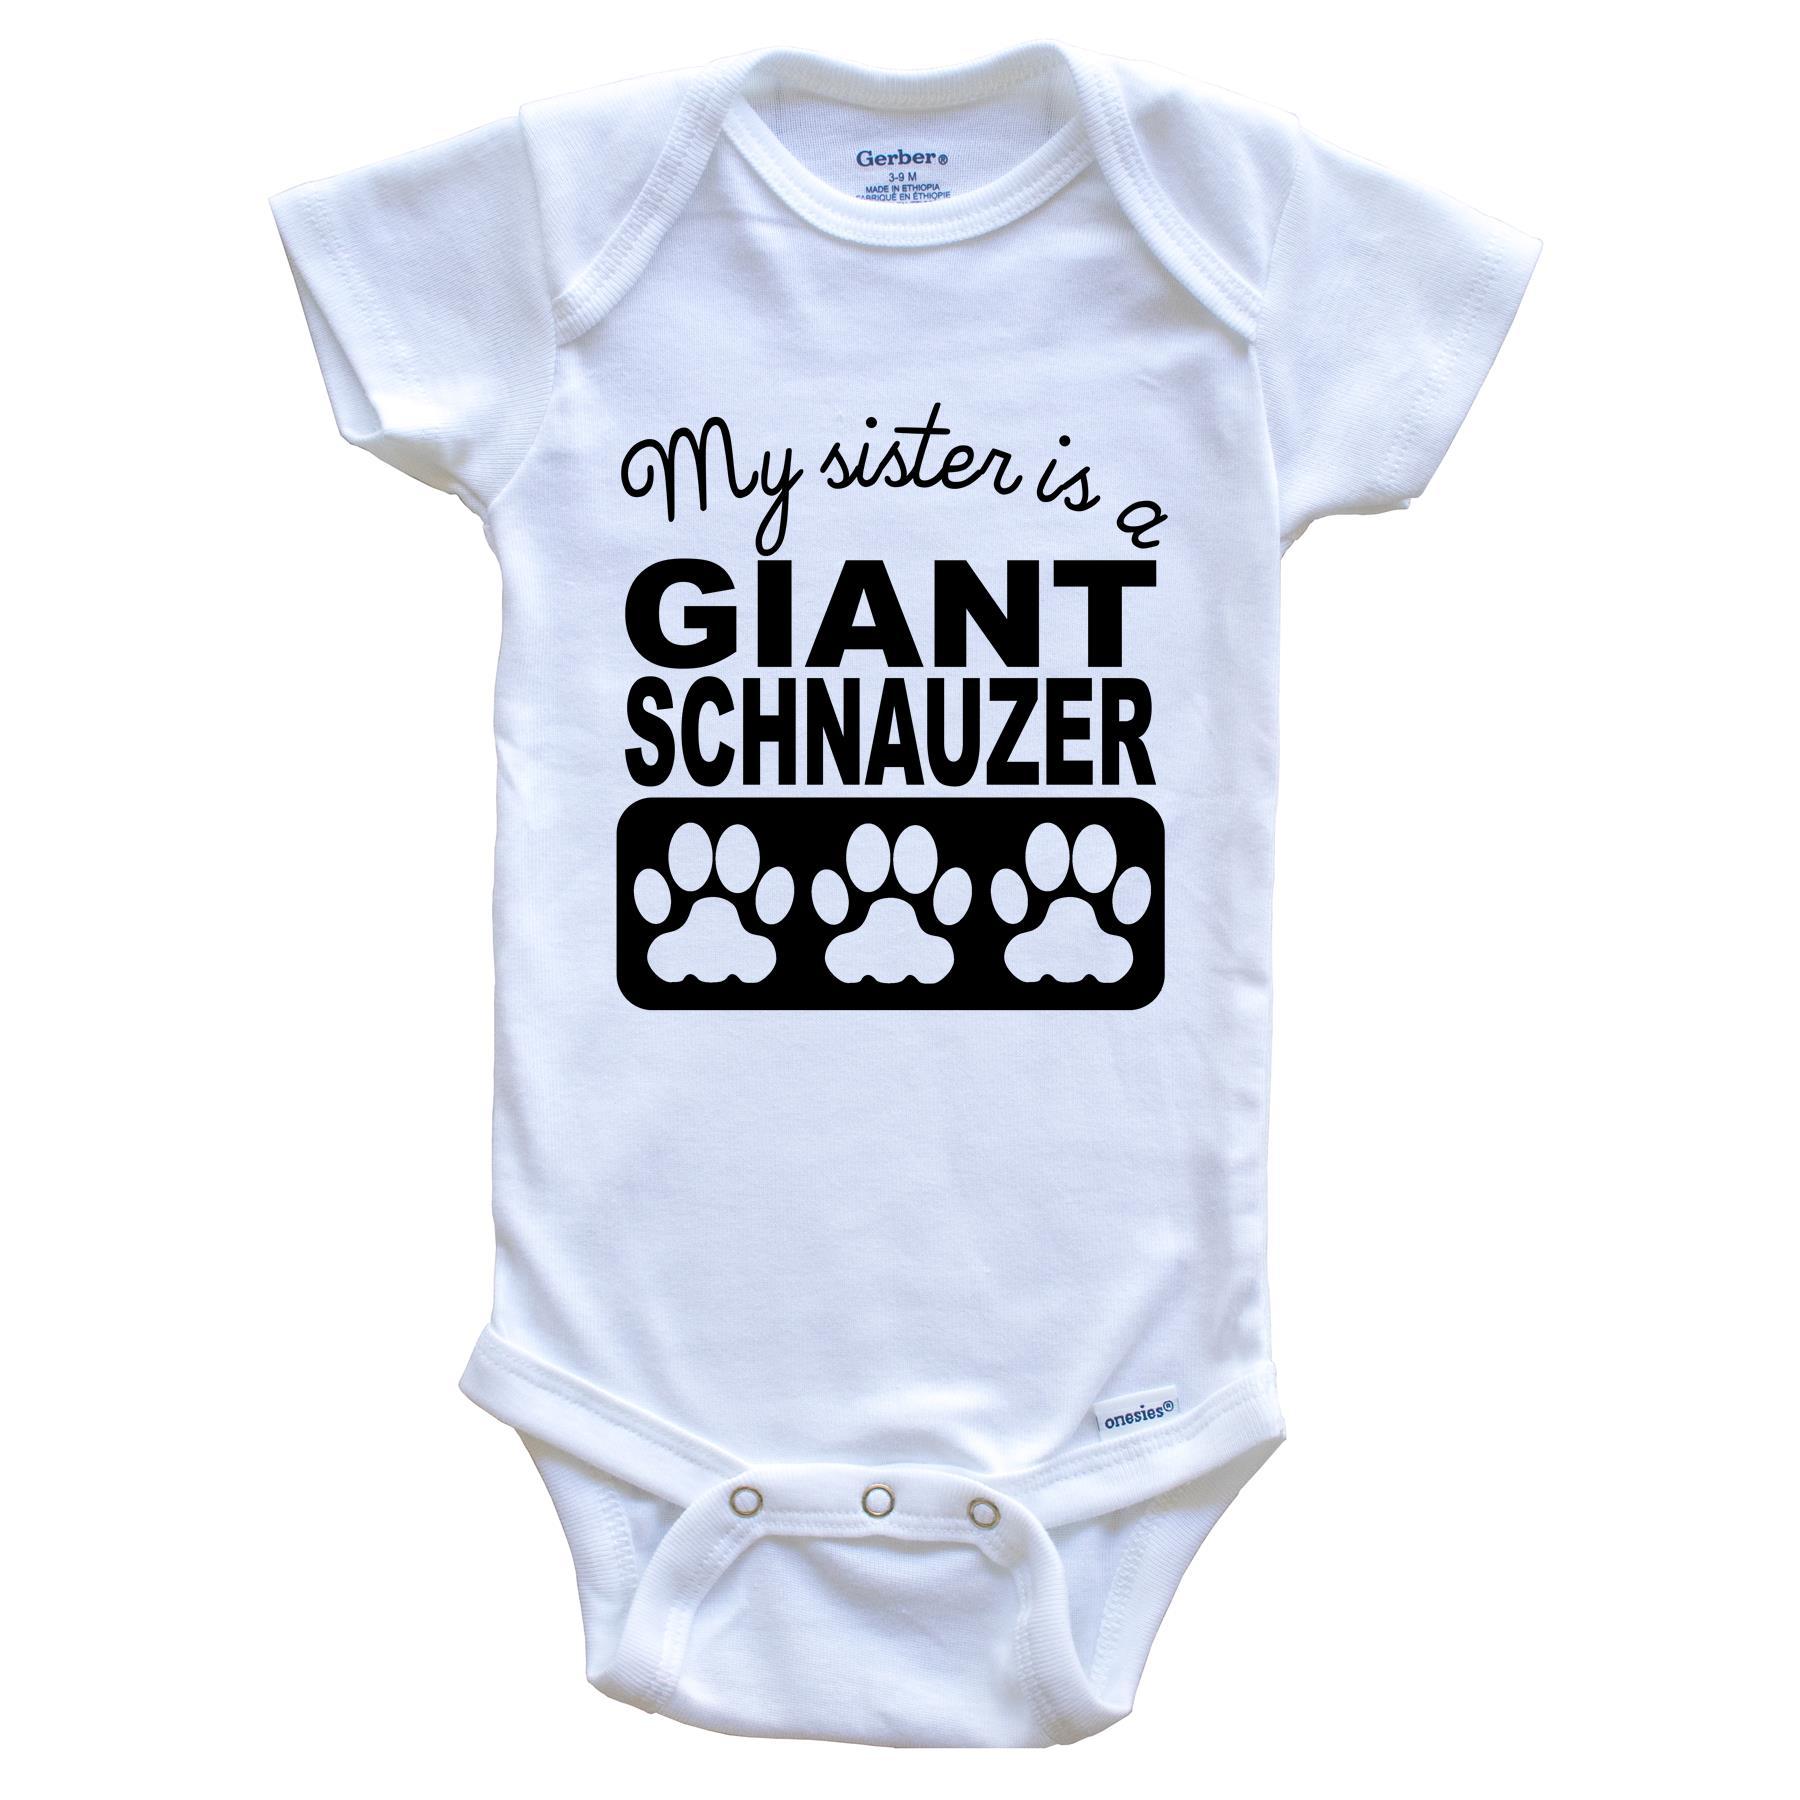 My Sister Is A Giant Schnauzer Baby Onesie